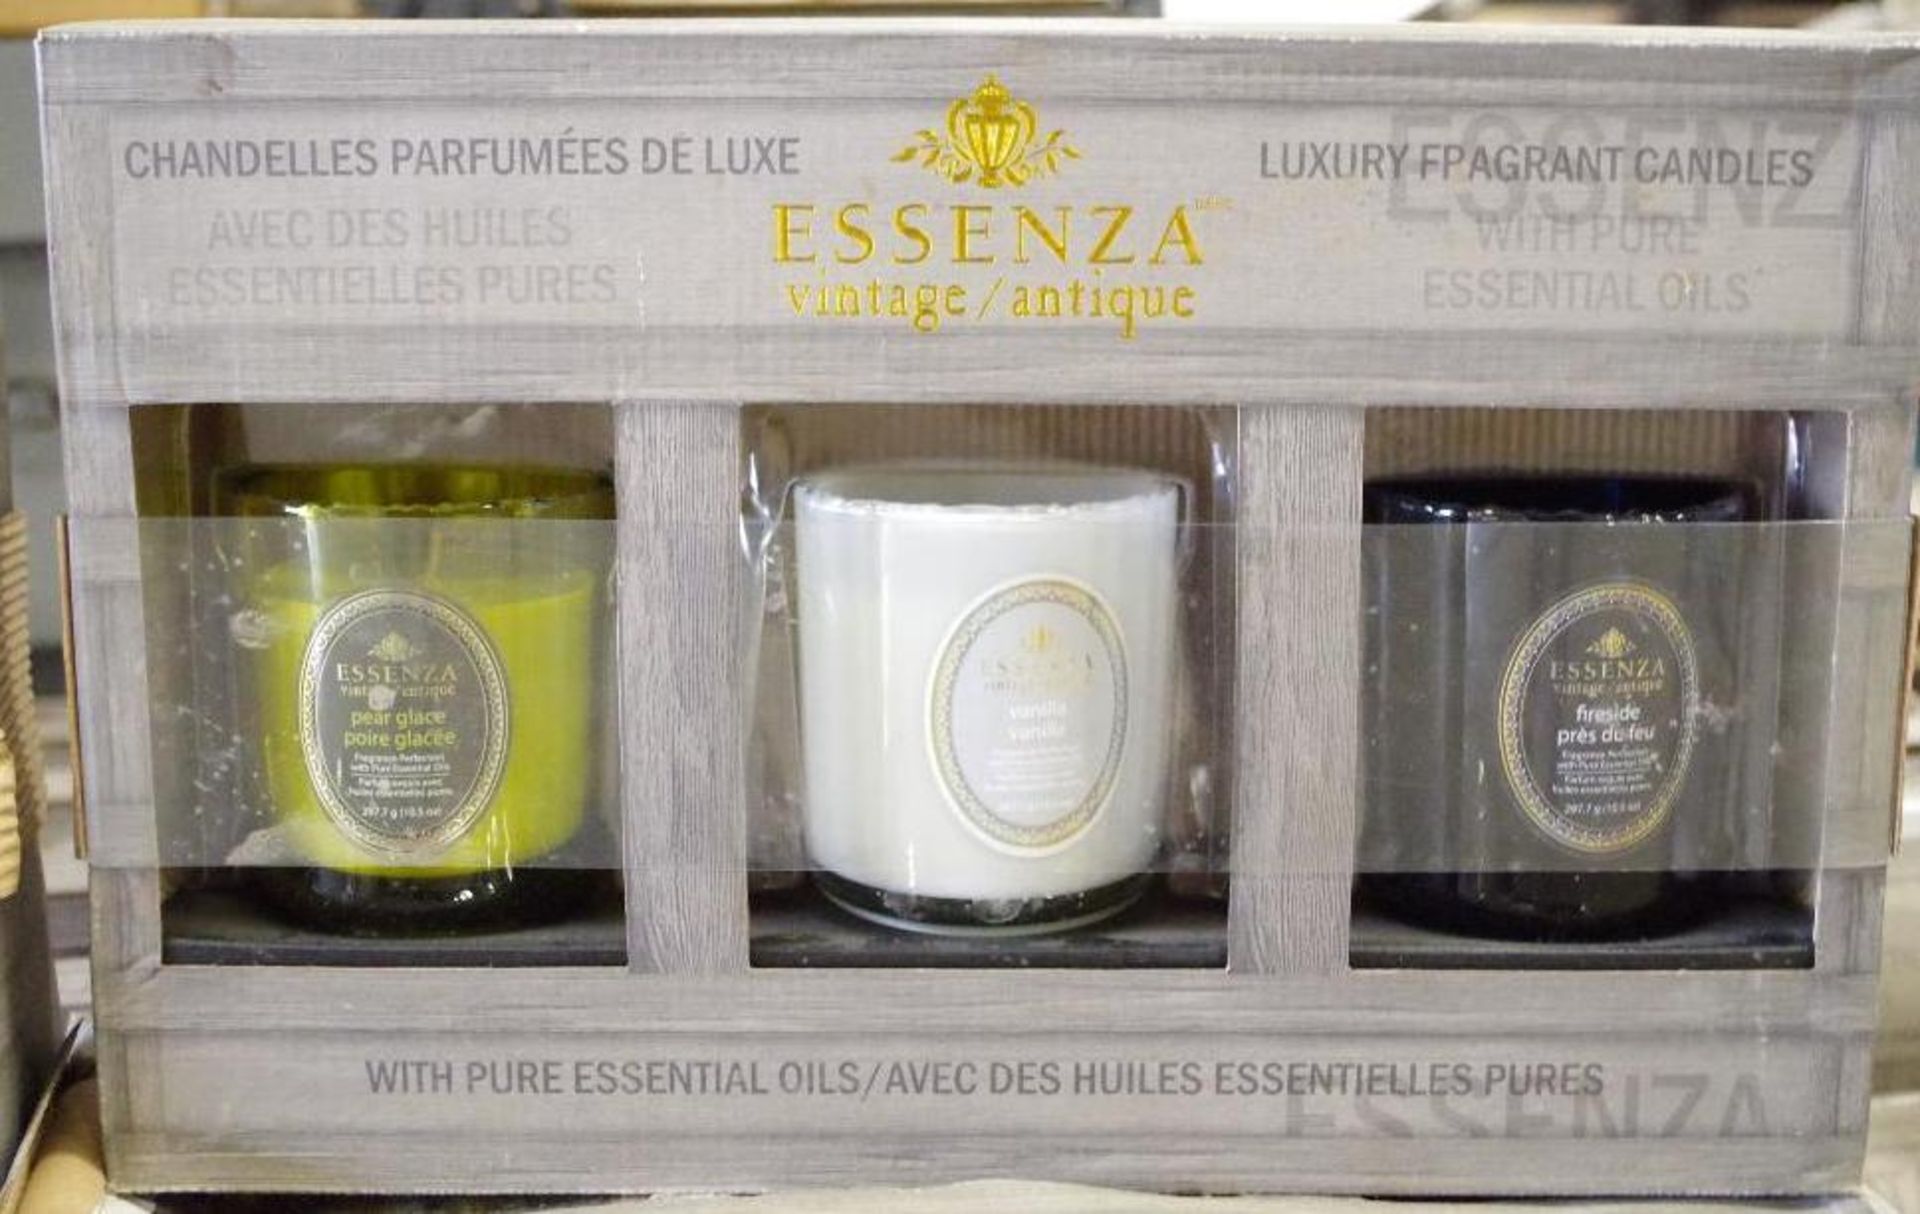 [60] ESSENZA Luxury Fragrance Candles (20 Boxes of 3) - Image 5 of 5